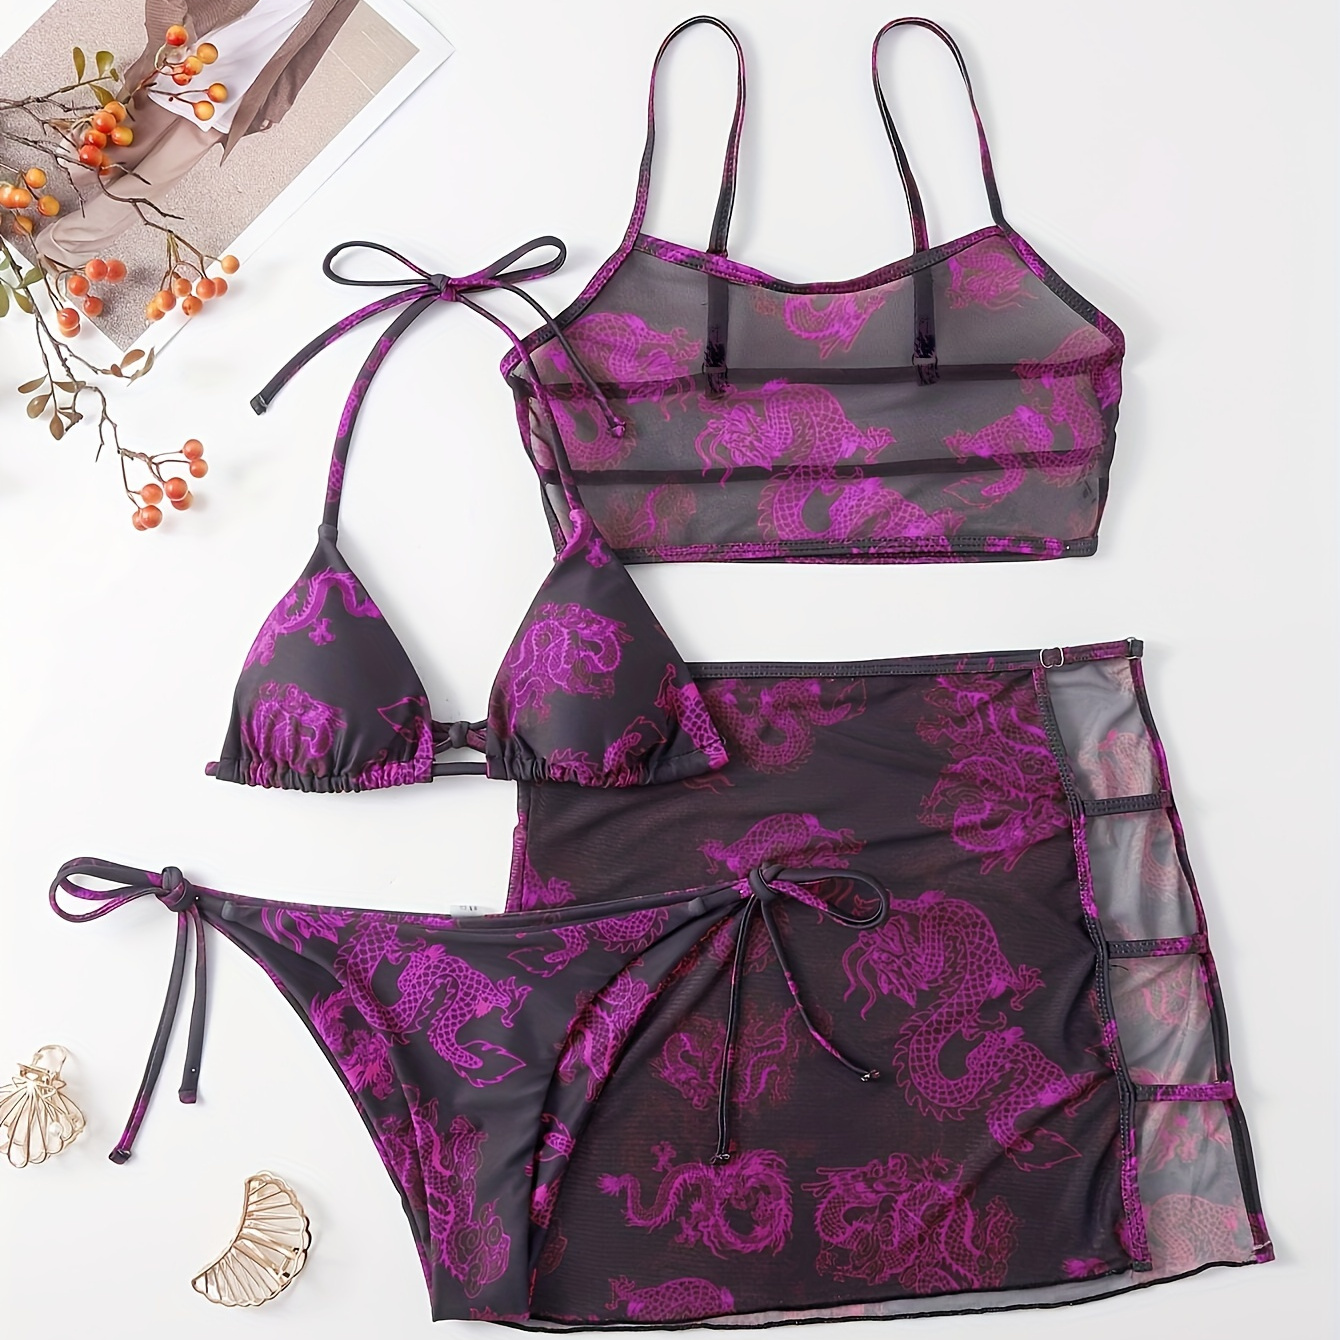 

Dragon Print Sheer Mesh 4-piece Bikini Set With Skirt, Halter Neck Bra & Tie Side High Cut Panty With Cover Up Top & Skirt Swimsuit